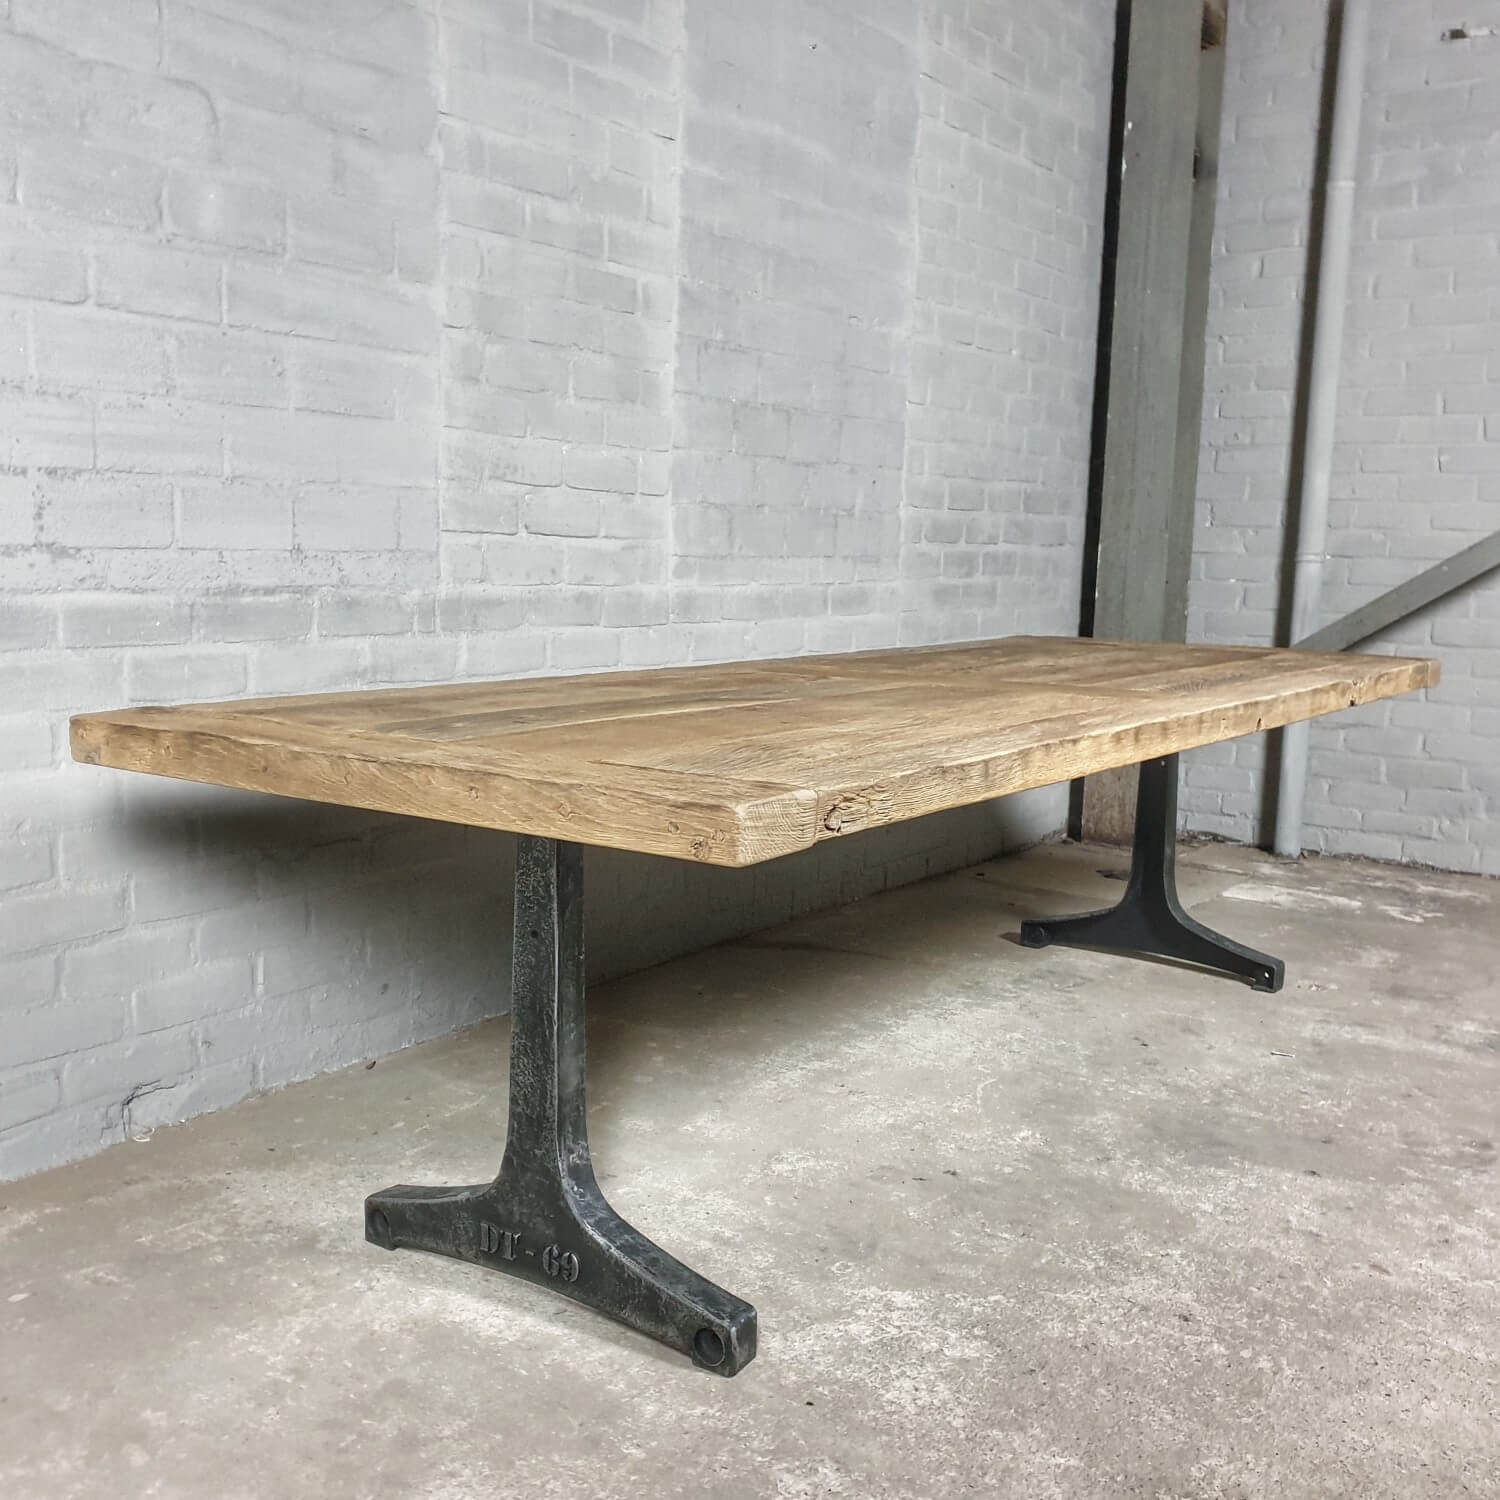 AINPECCA Dining Table Industrial Style MDF top with Metal legs 150 x 90cm, Oak effect top with leg A